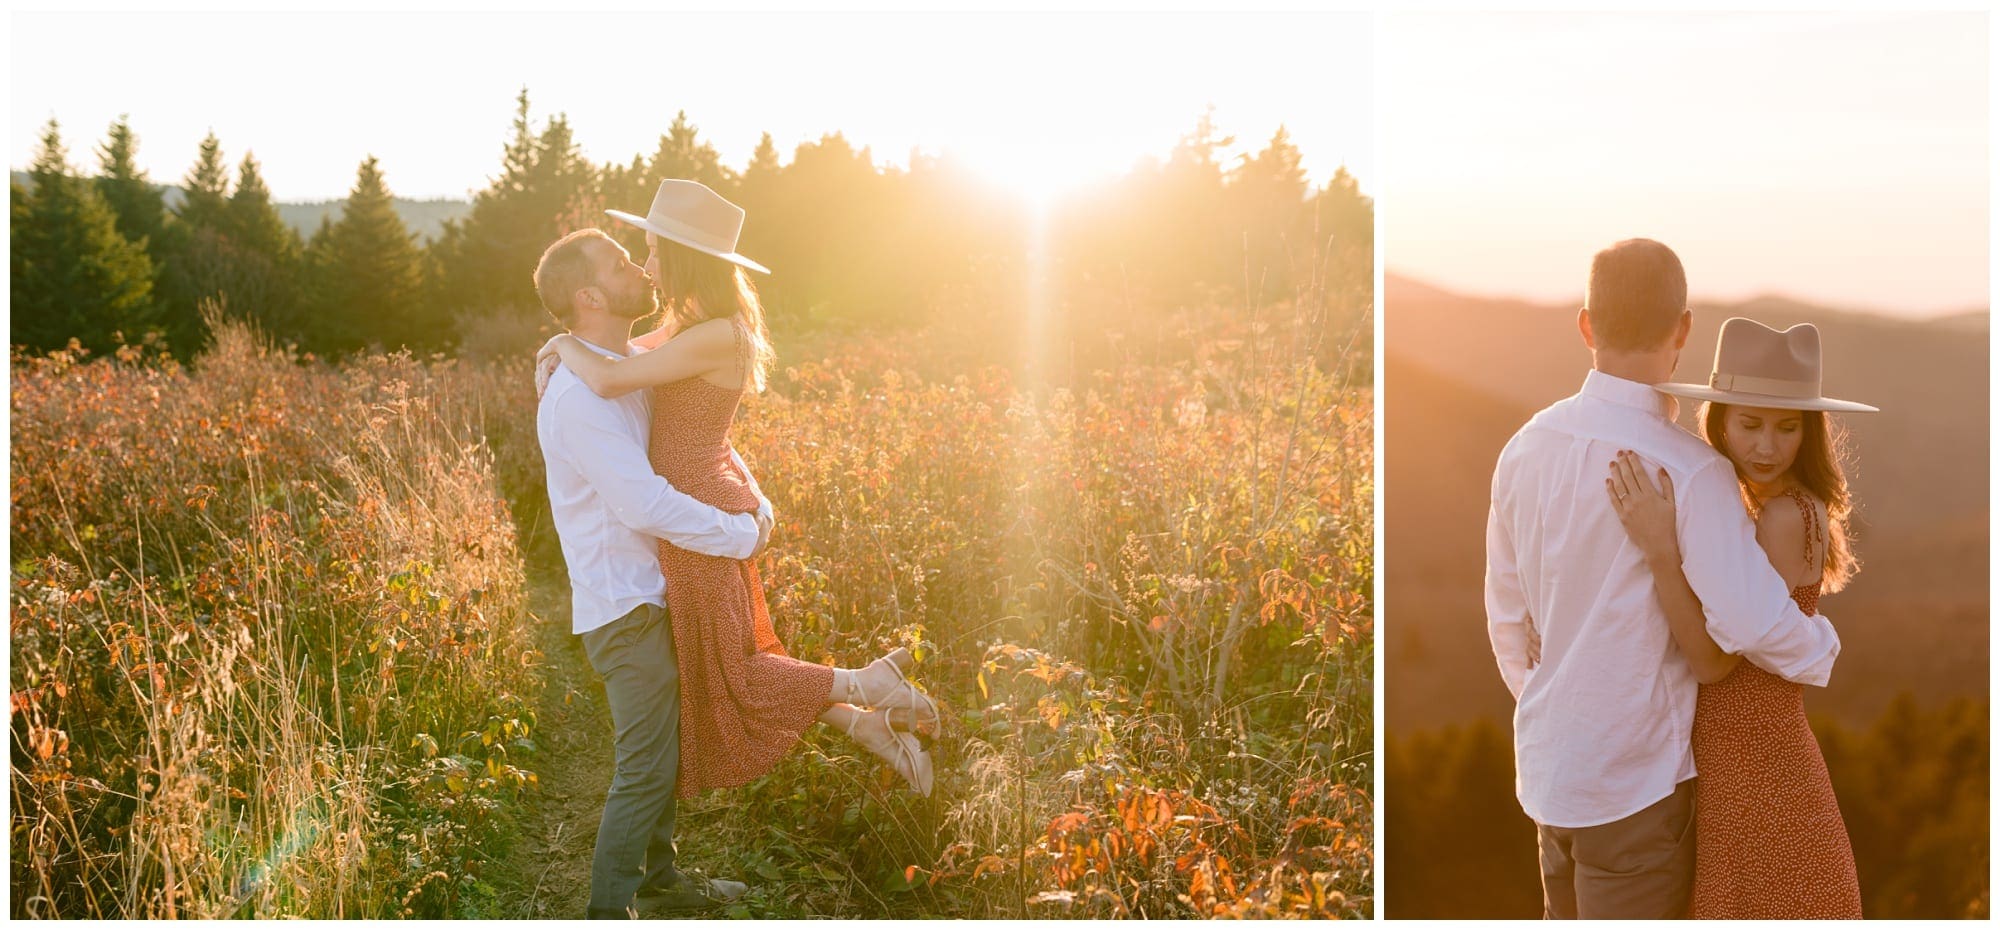 Engagement photos in a field in Asheville, NC.